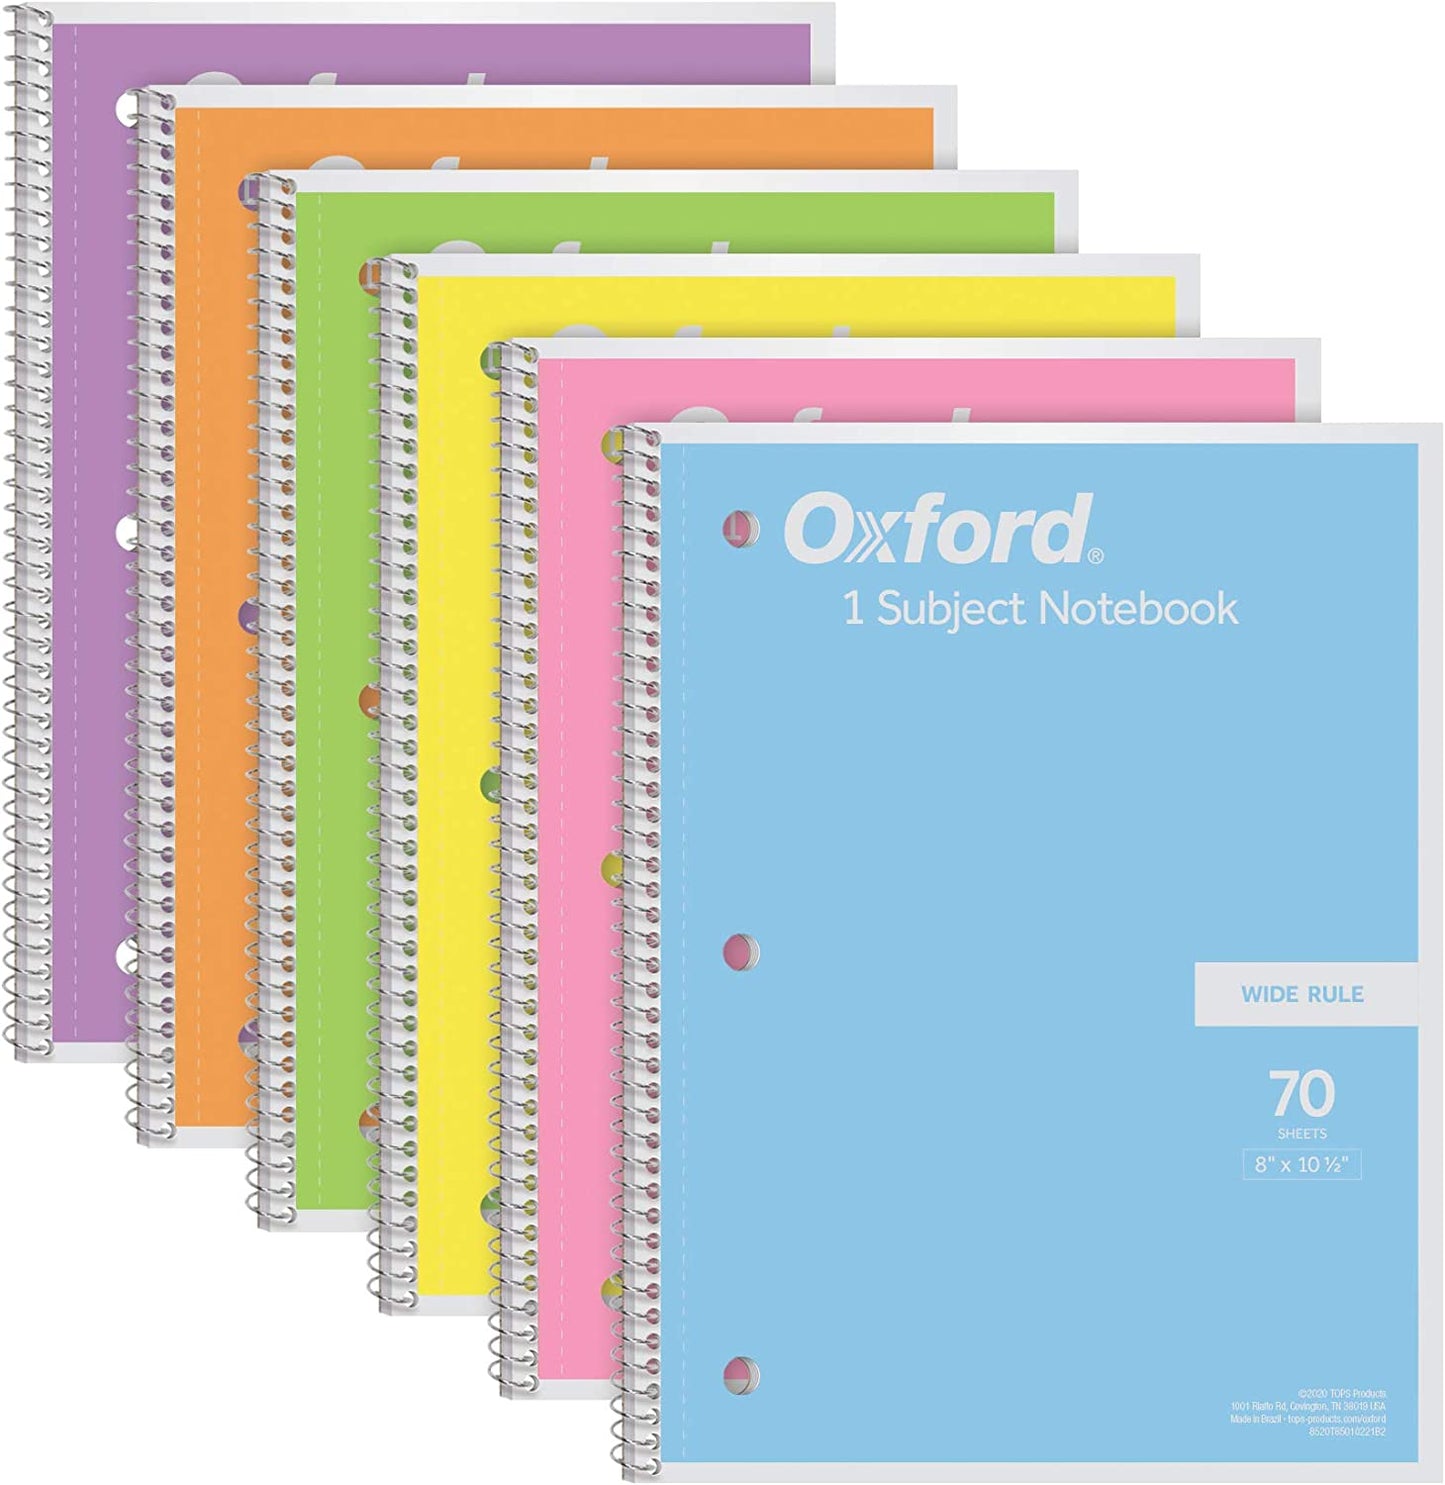 Oxford Spiral Notebook 6 Pack, 1 Subject (5,600 Points)